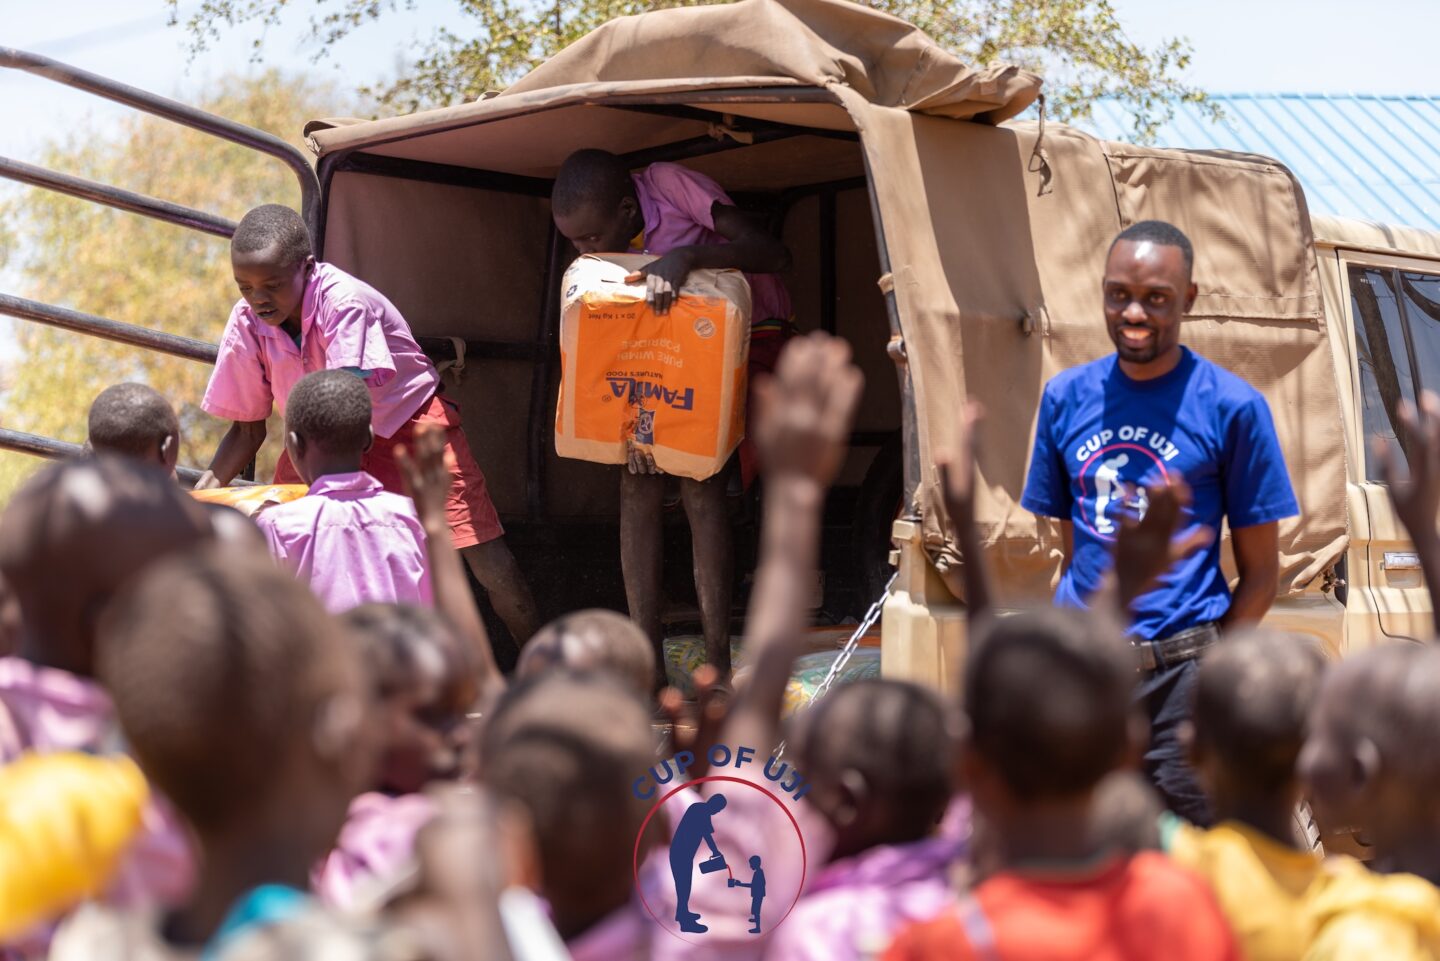 Amonde dropping off uji ingredients at a primary school (Photo Courtesy of Cup of Uji)